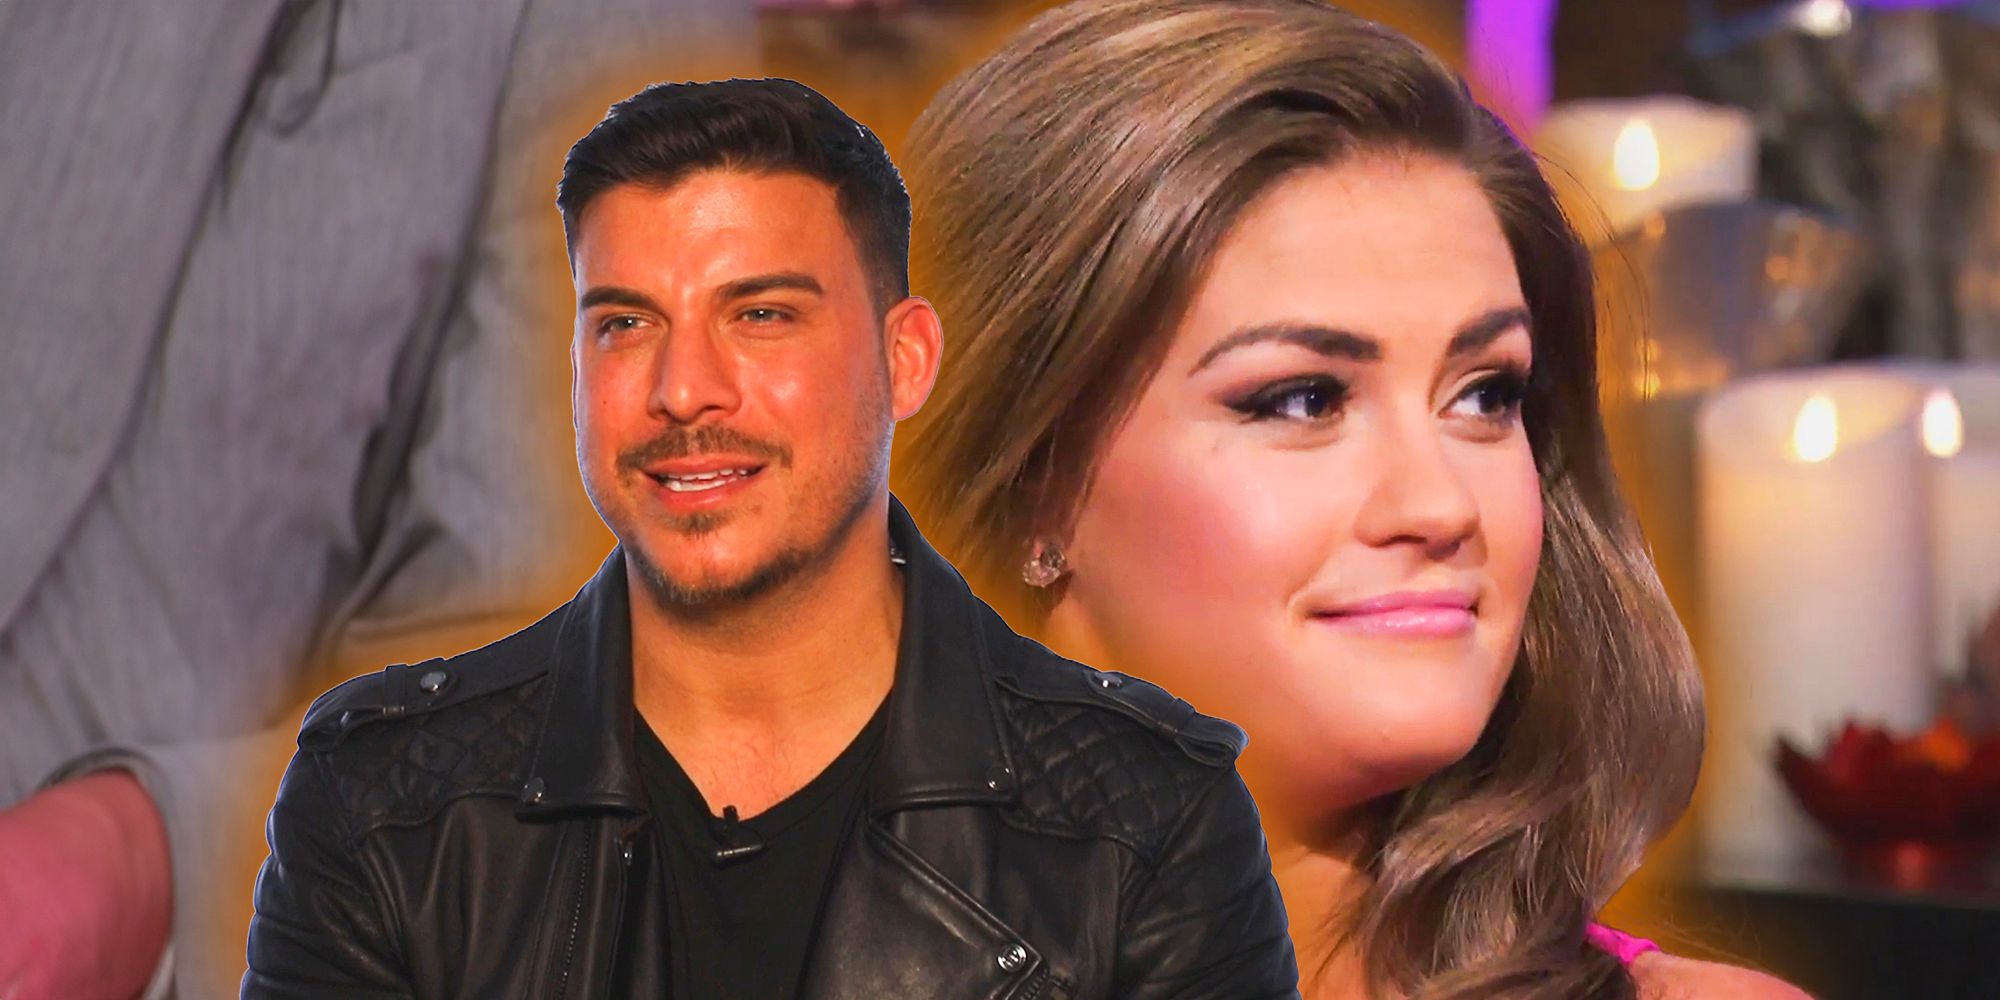 Vanderpump Rules' Jax Taylor and Brittany Cartwright with slight smiles